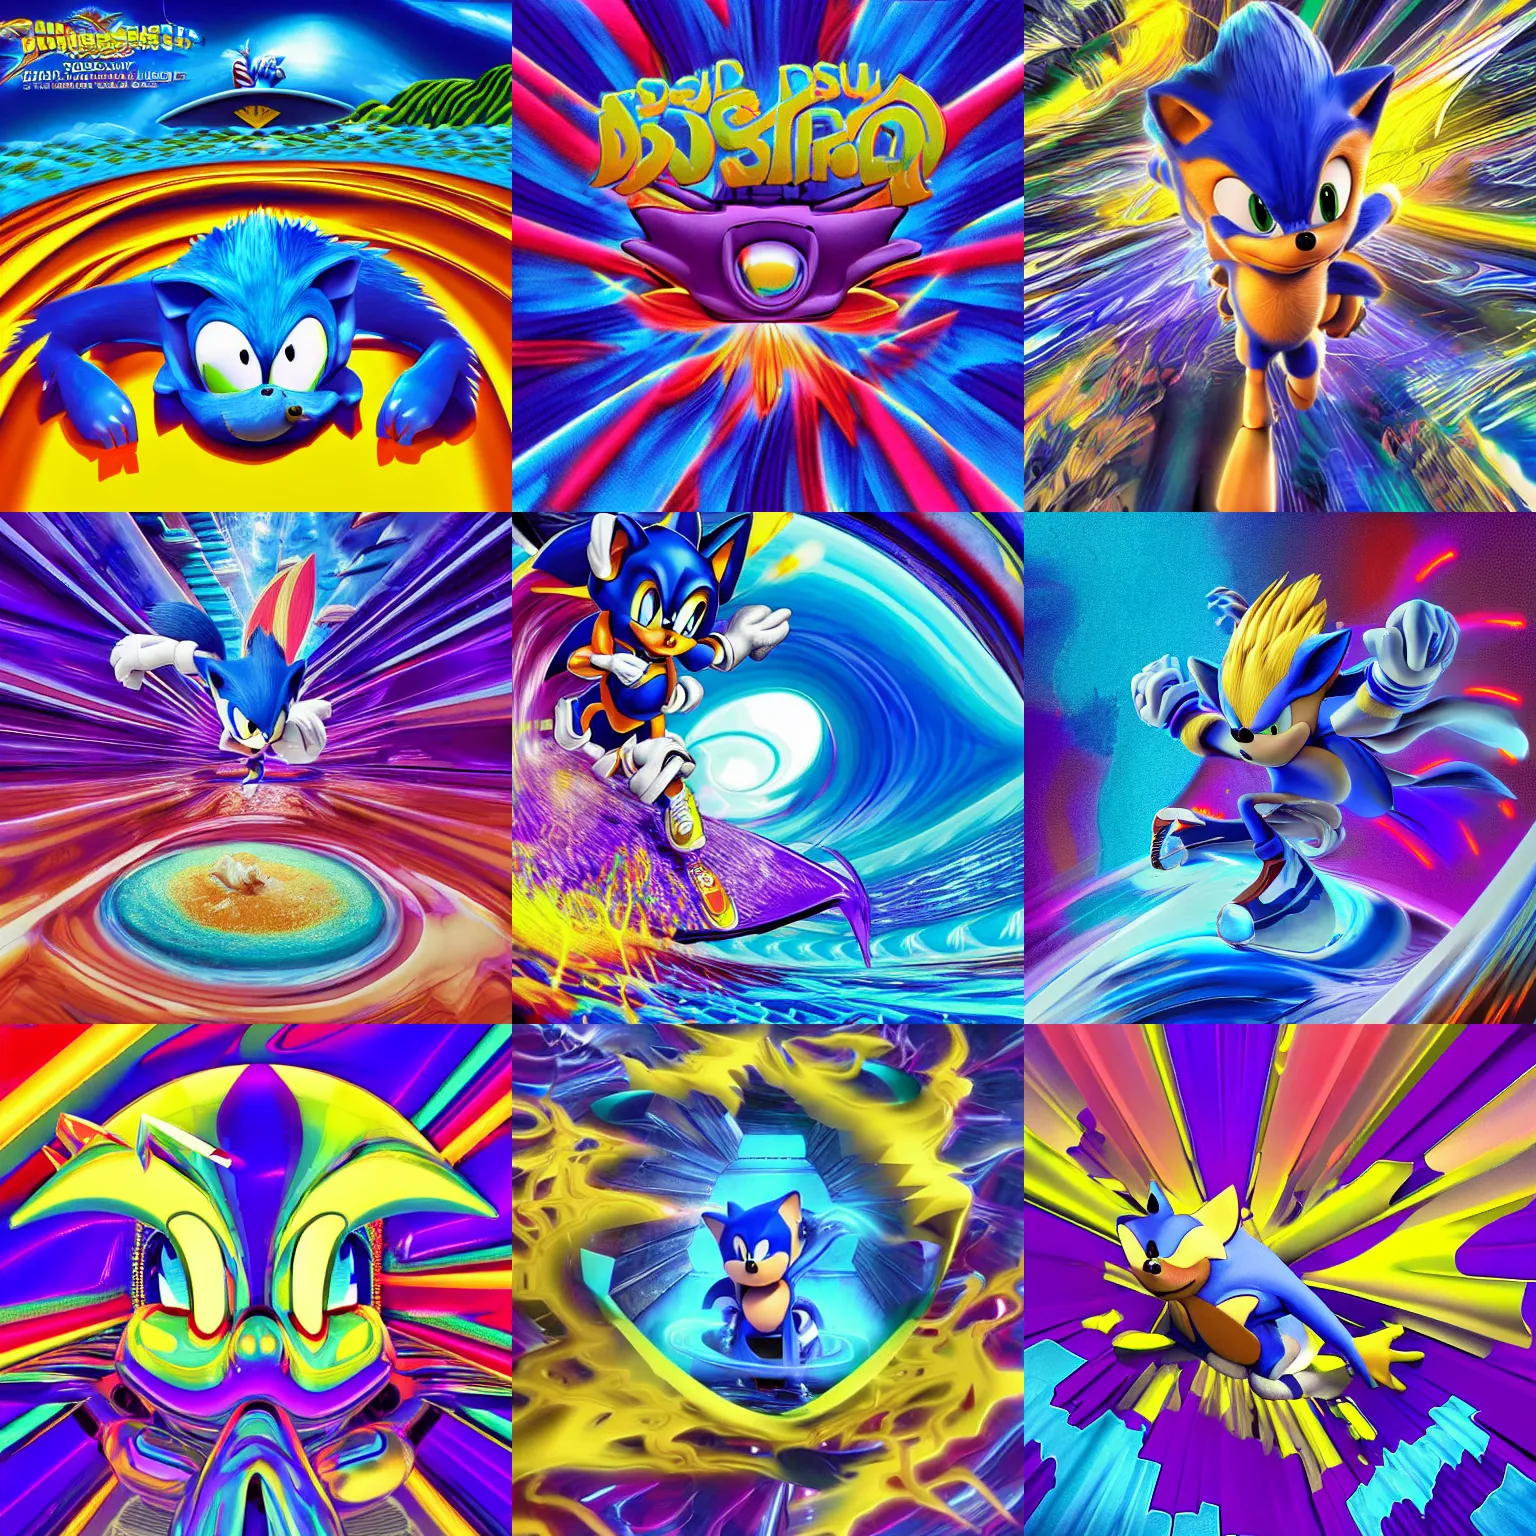 Prompt: surreal, recursive, sharp, detailed professional, high quality hard surface render MGMT album cover of a liquid dissolving LSD DMT blue sonic the hedgehog surfing through cyberspace, purple checkerboard background, 1990s 1992 Sega Genesis video game album cover